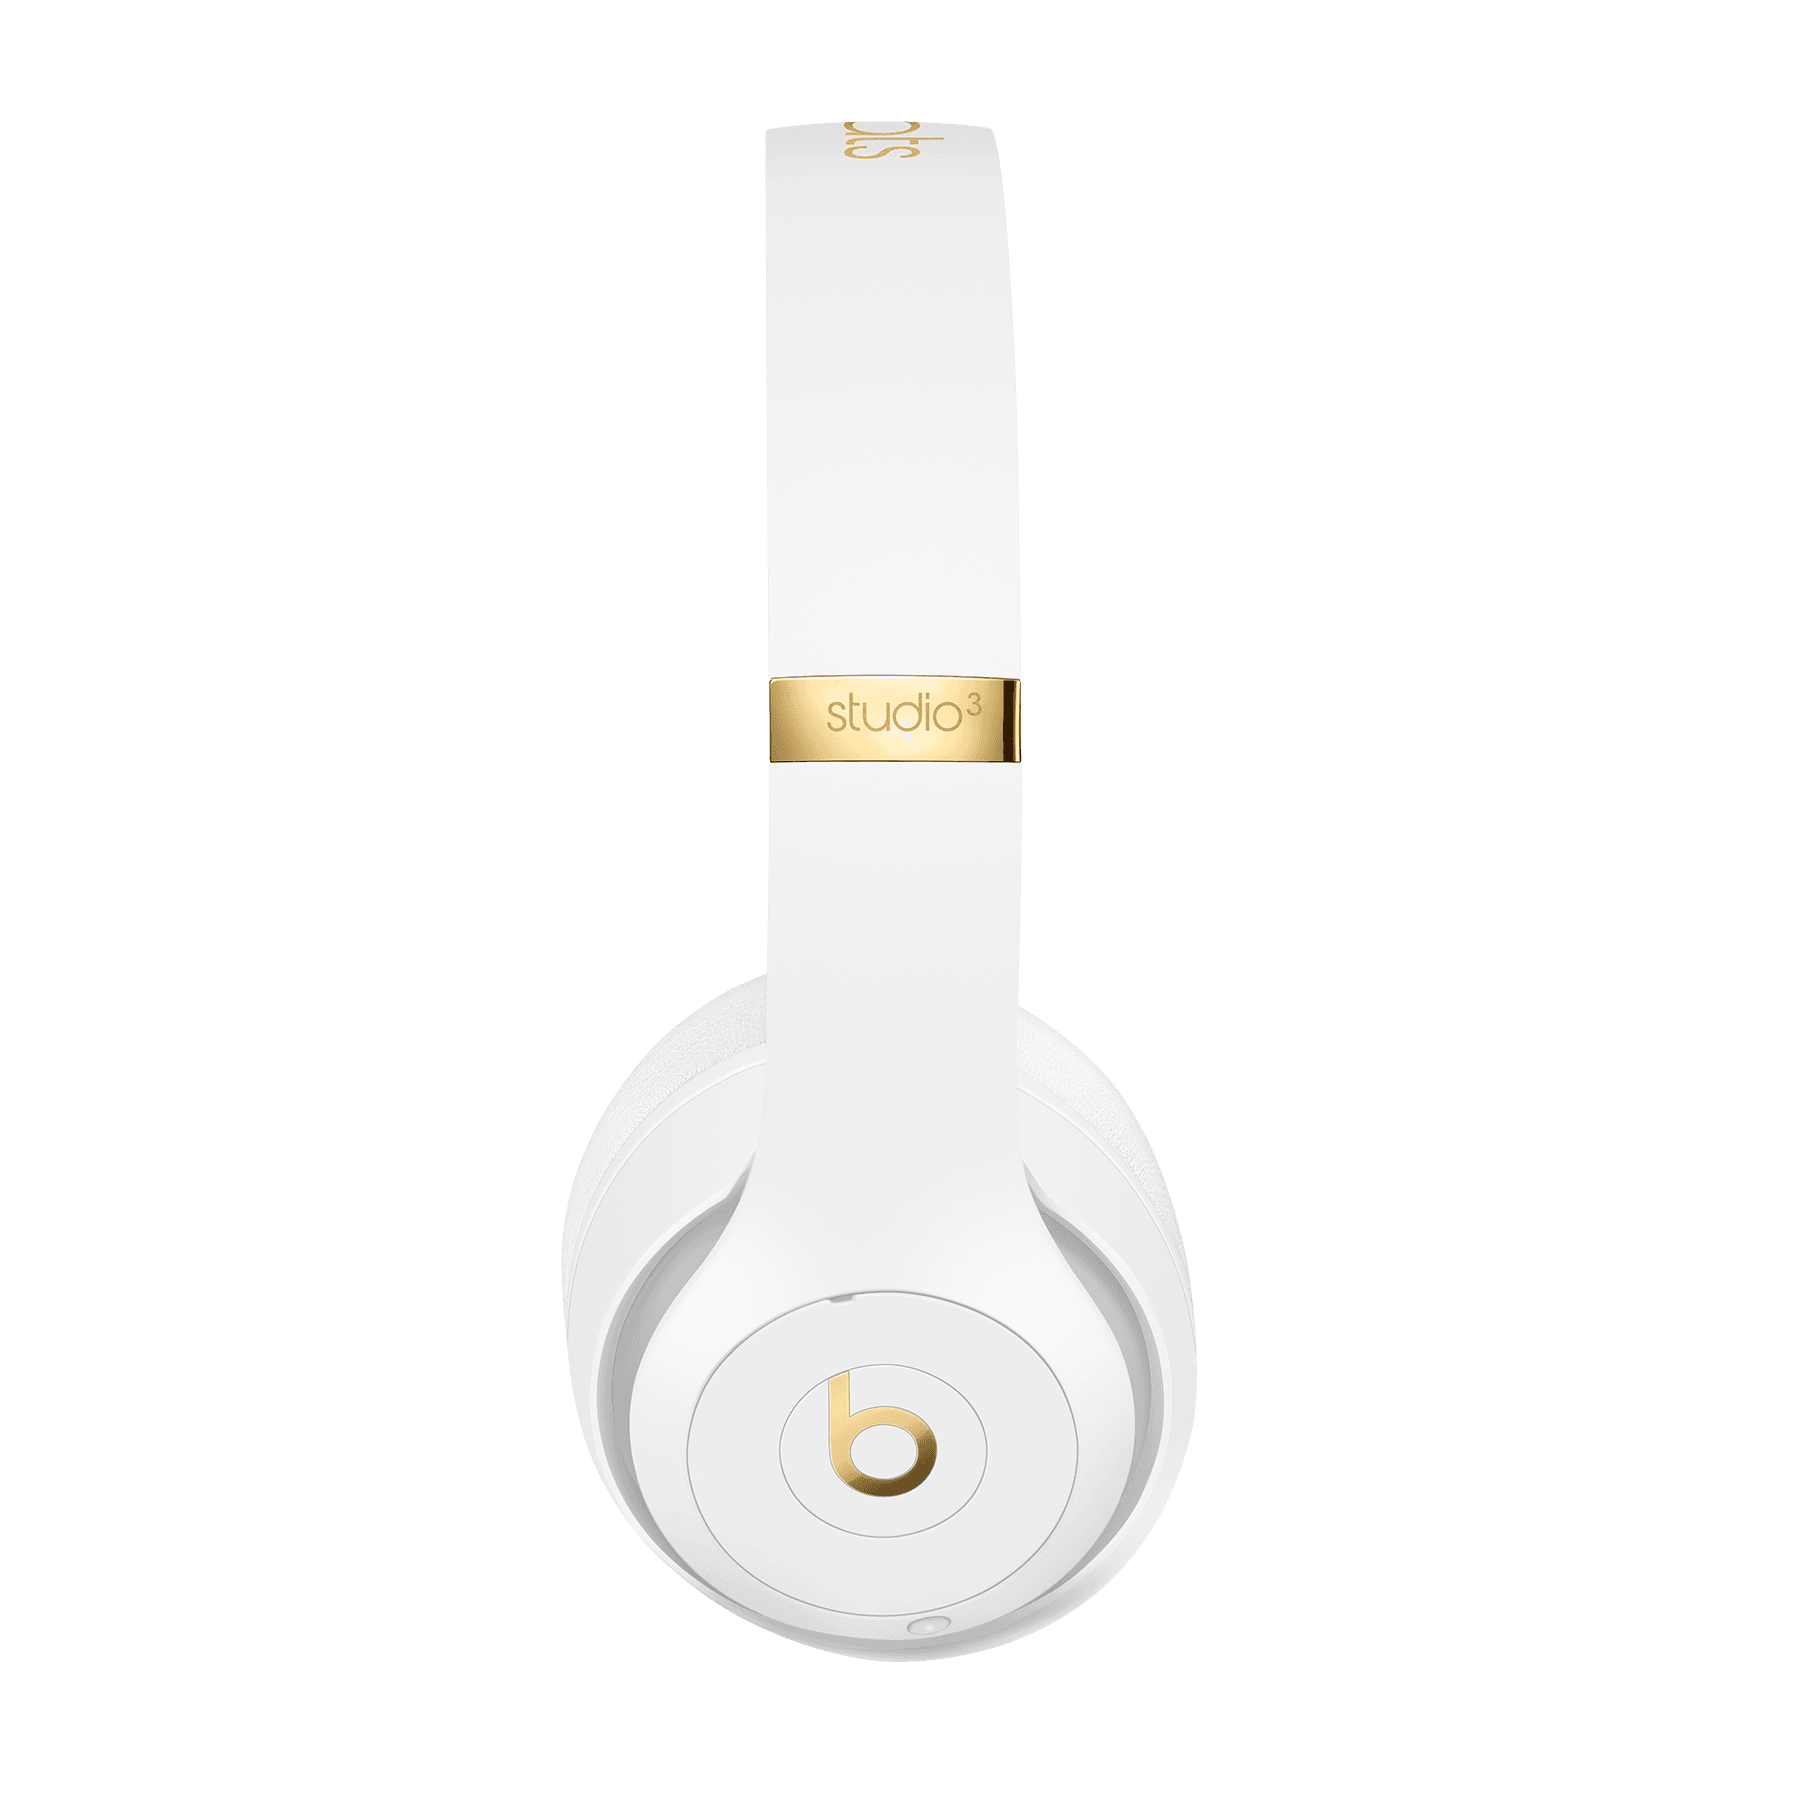 gold and white beats